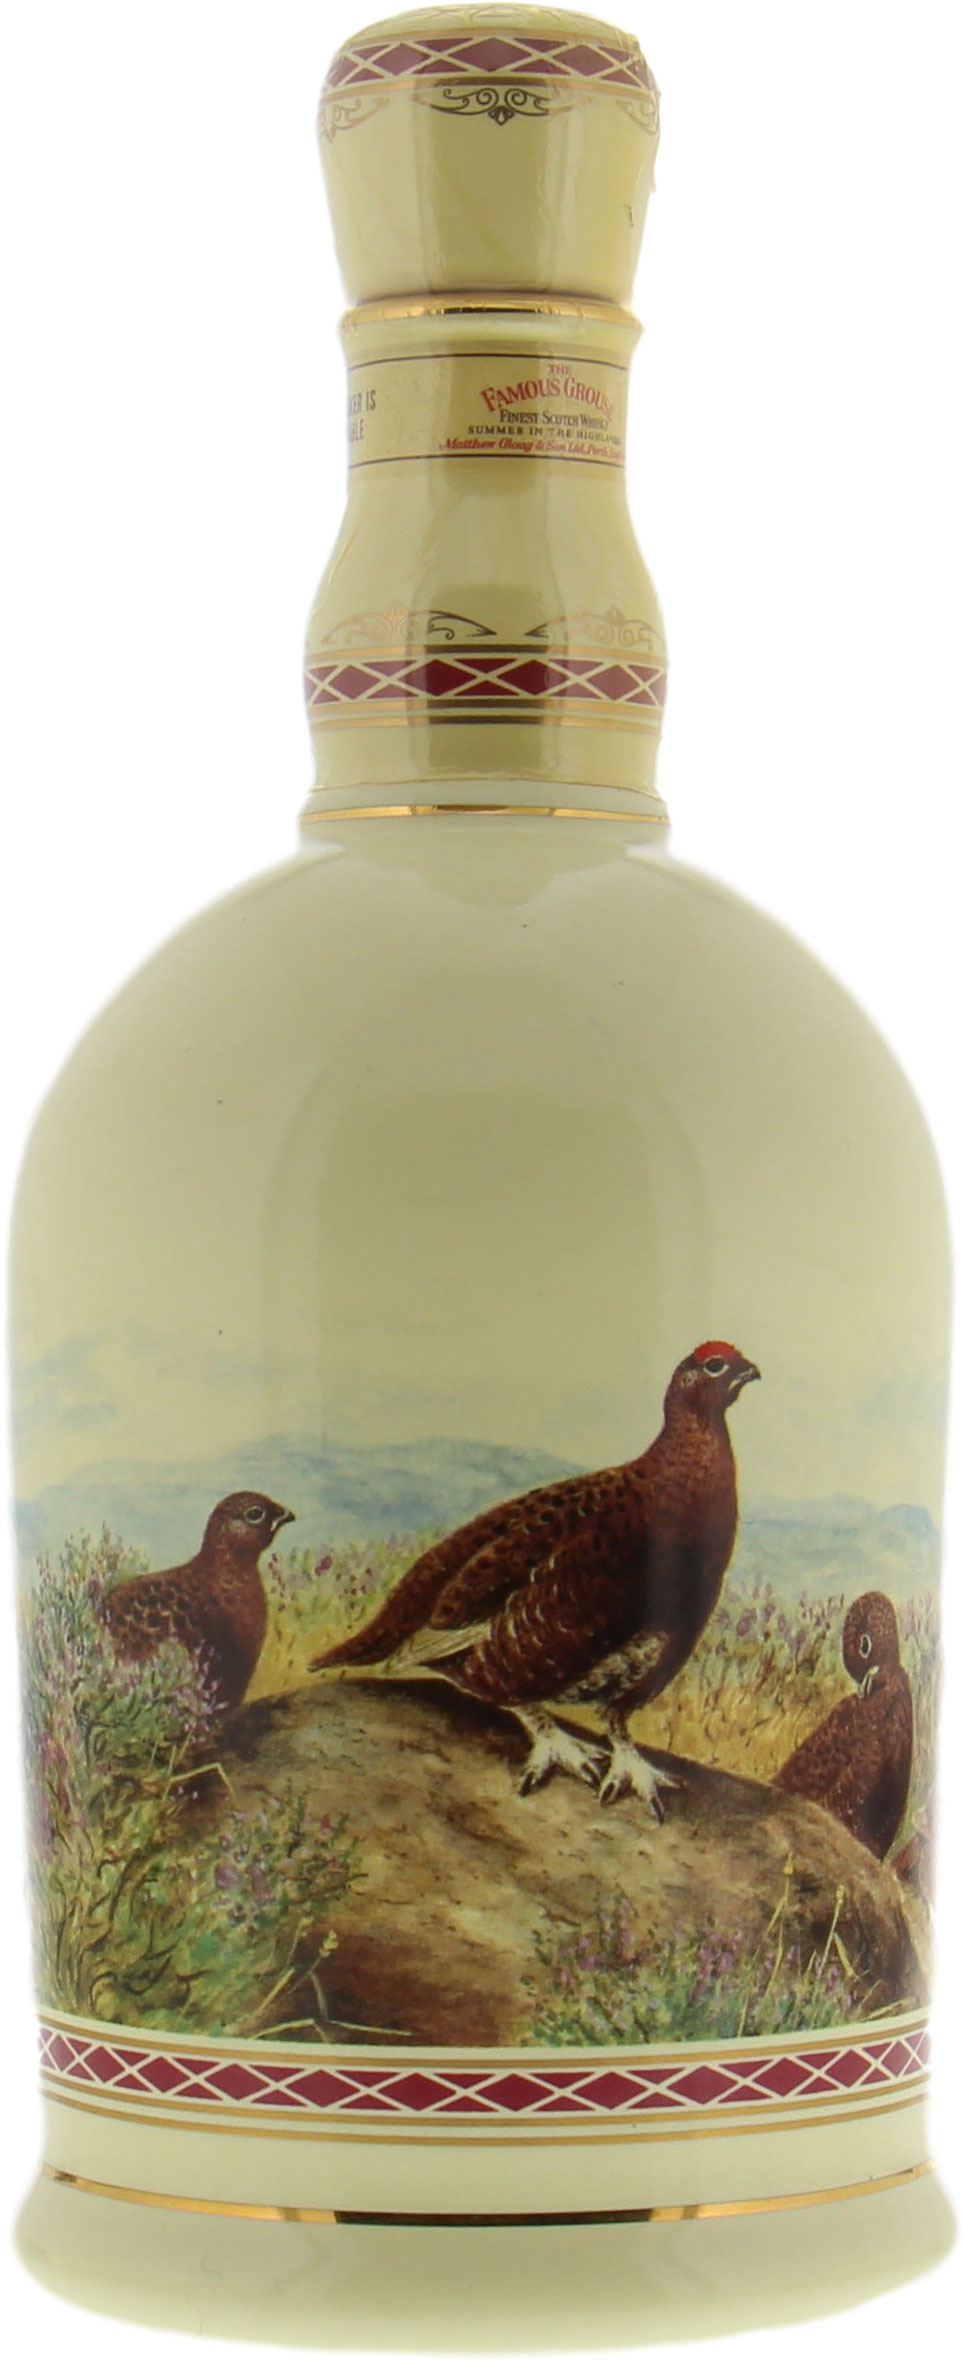 The Famous Grouse - Highland Ceramic Decanter 40% NV No Original Container